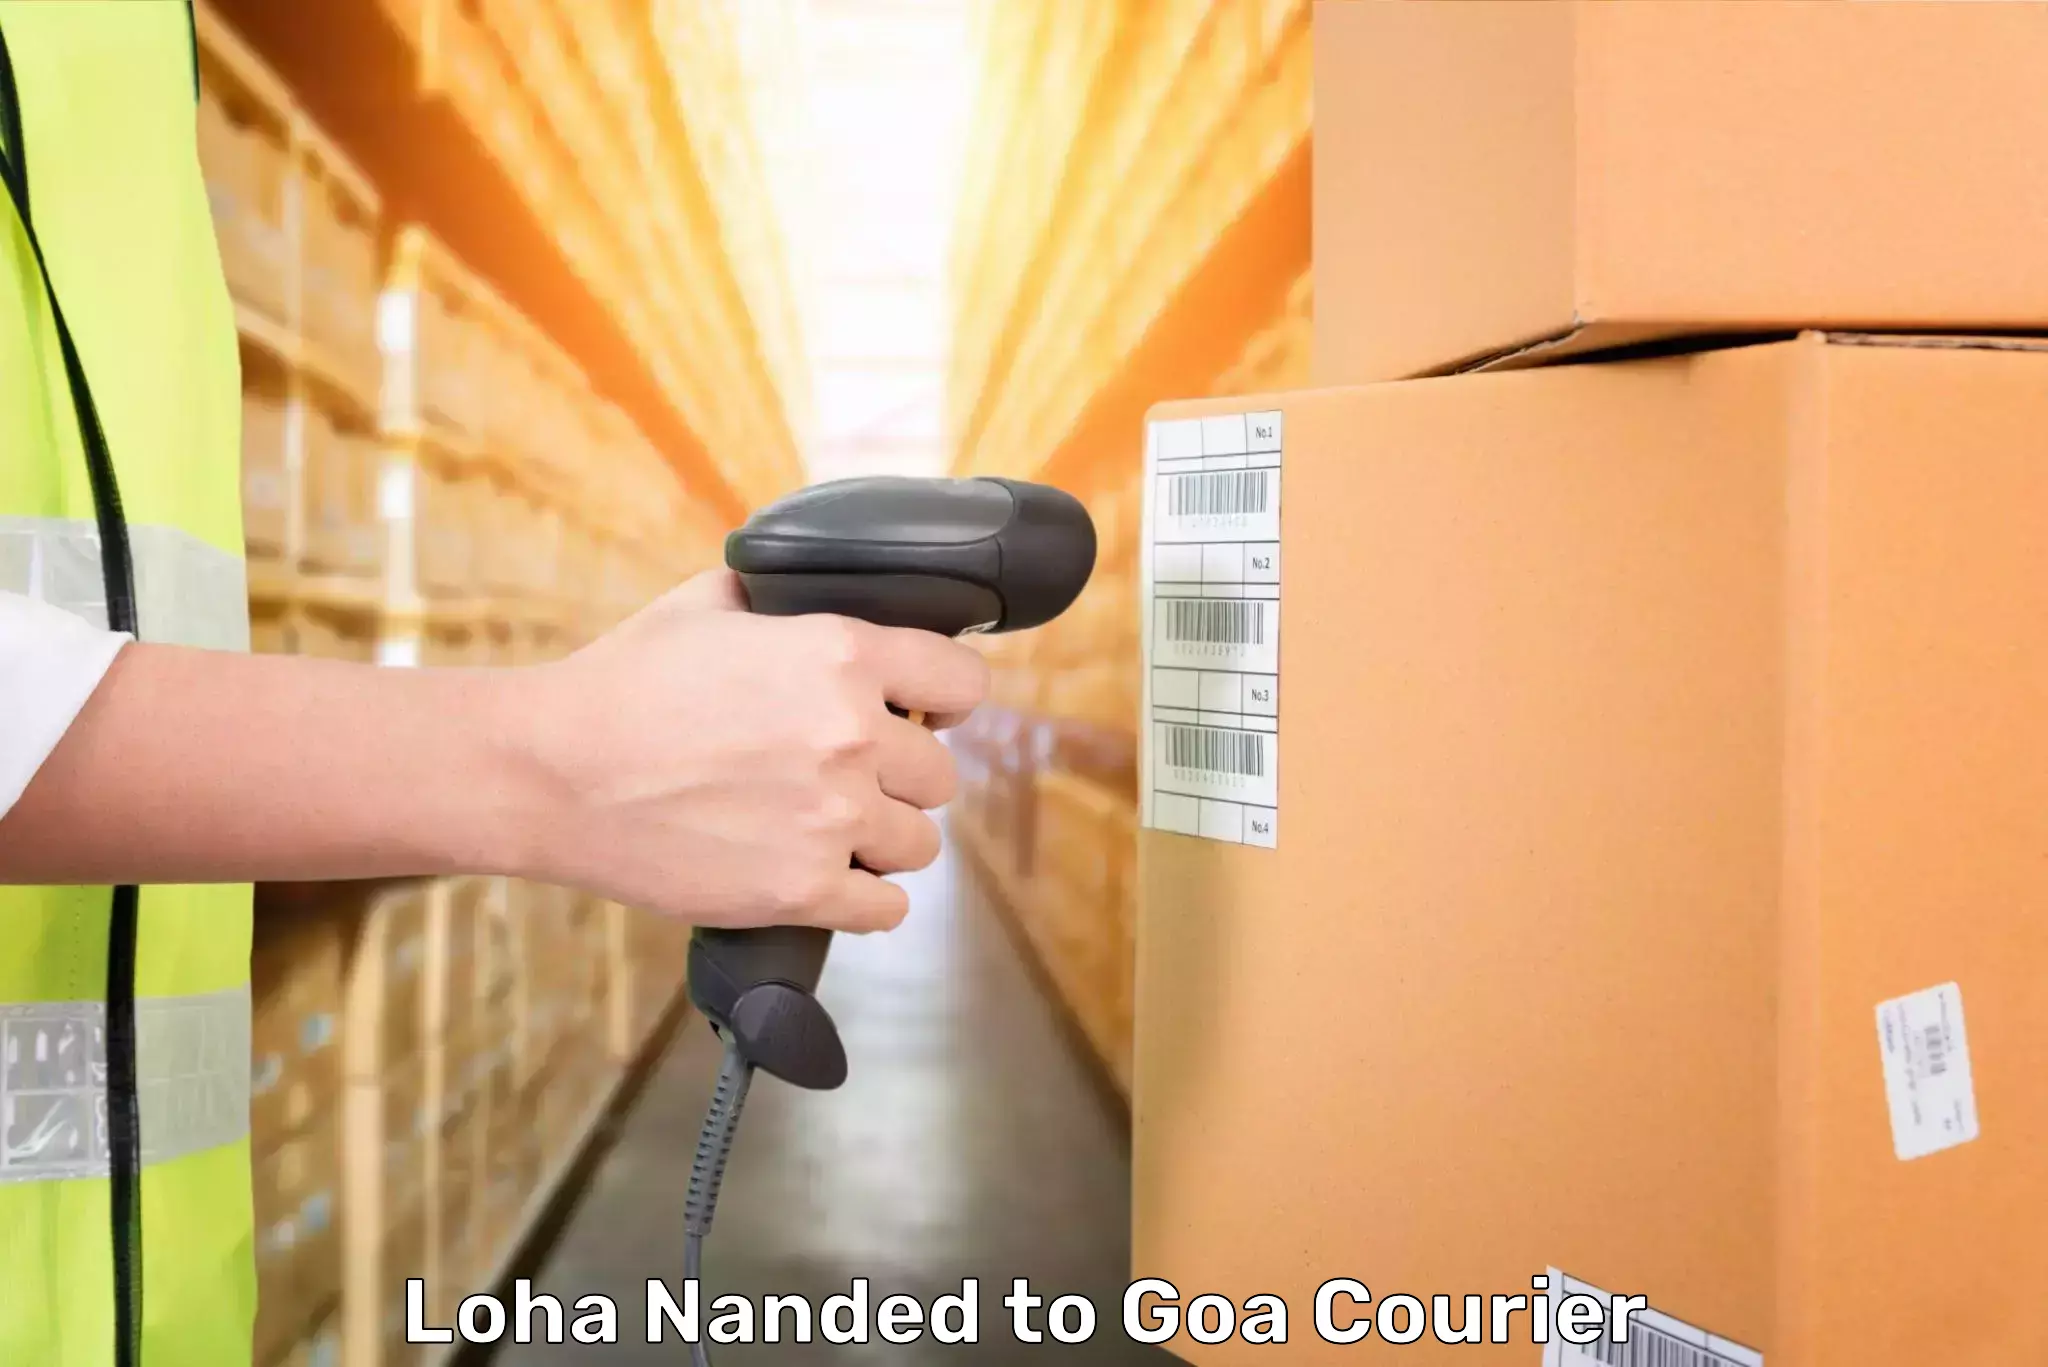 Luggage shipment tracking in Loha Nanded to Goa